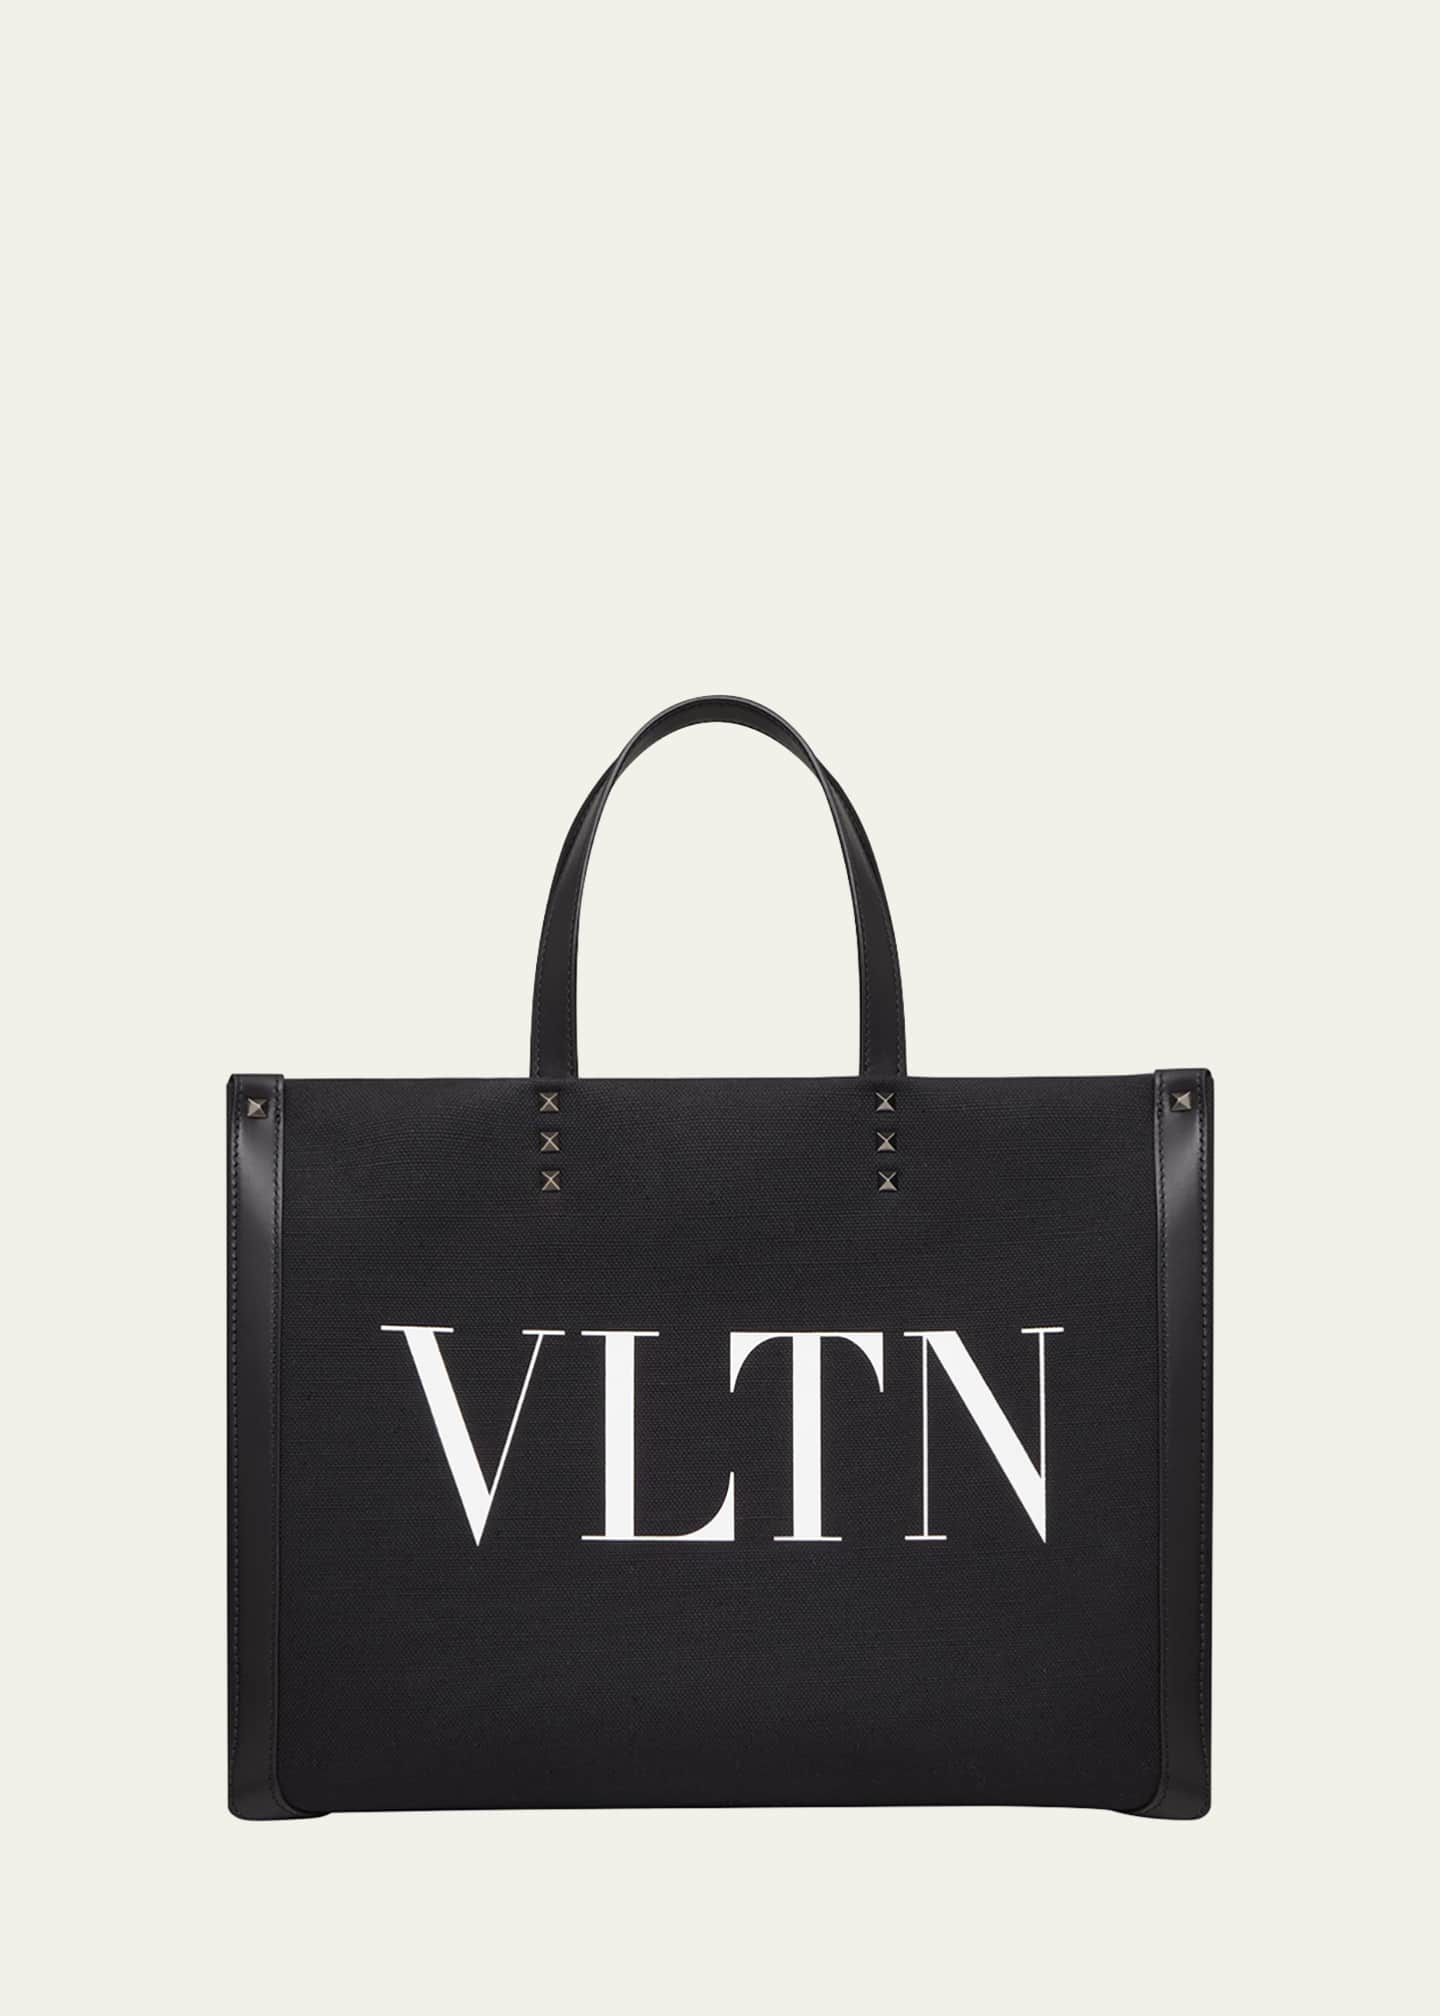 Valentino Bags Vacation beach tote bag in monochrome